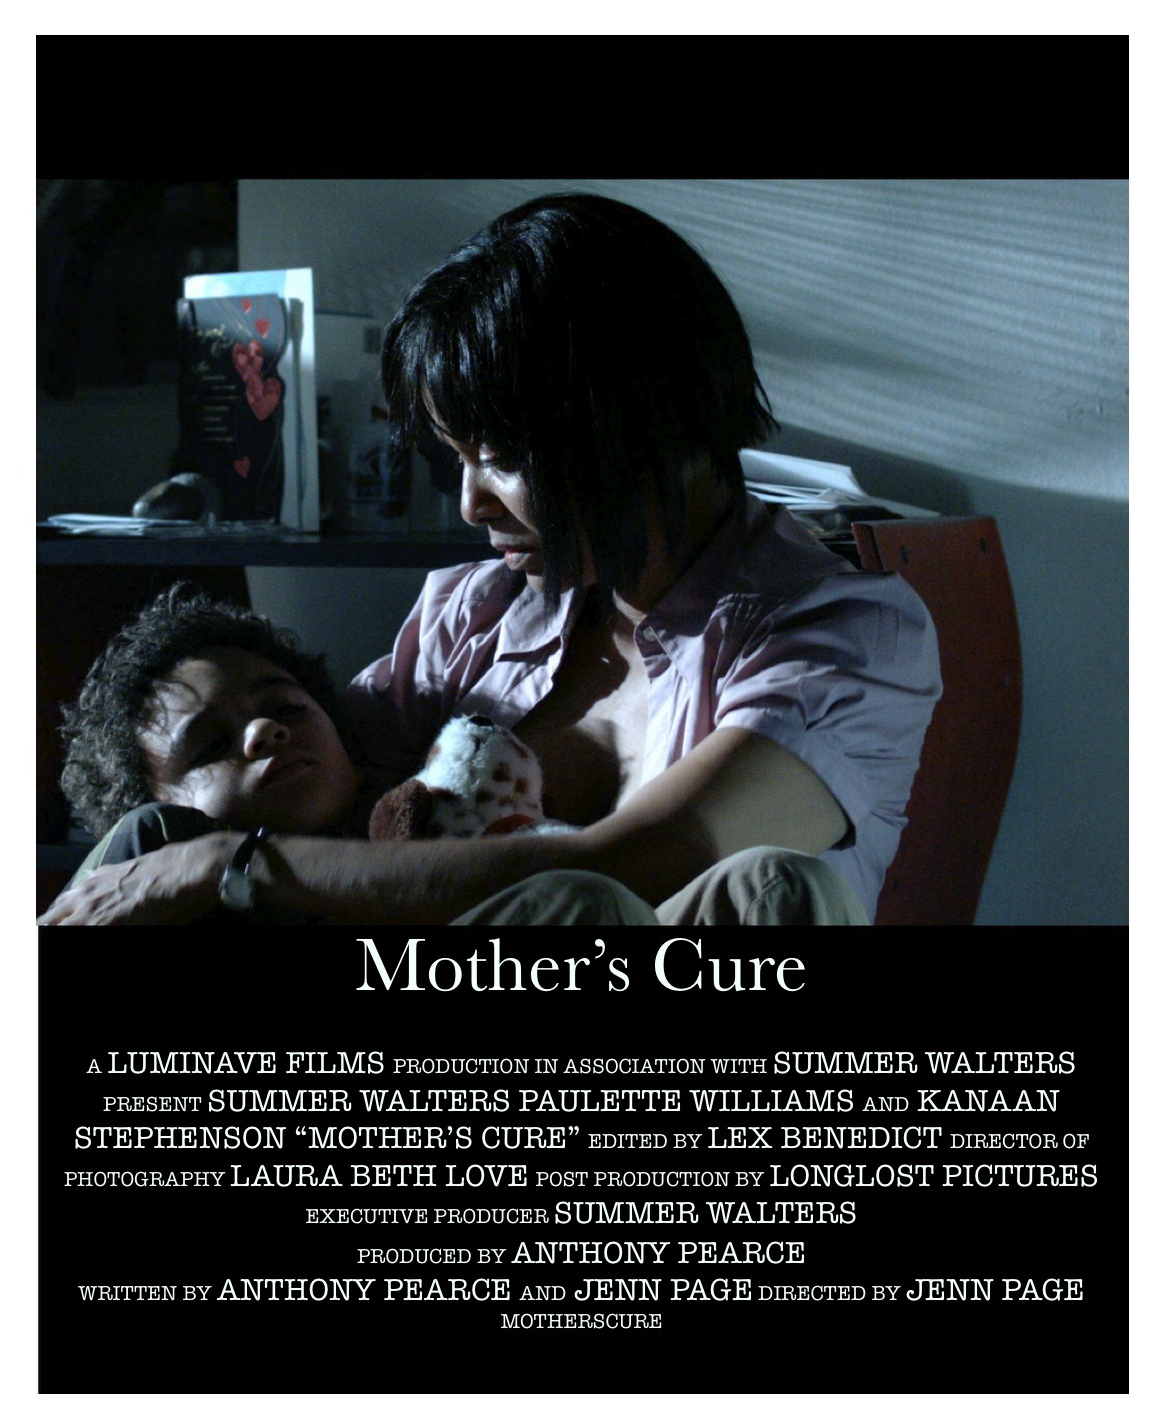 MOTHER'S CURE poster